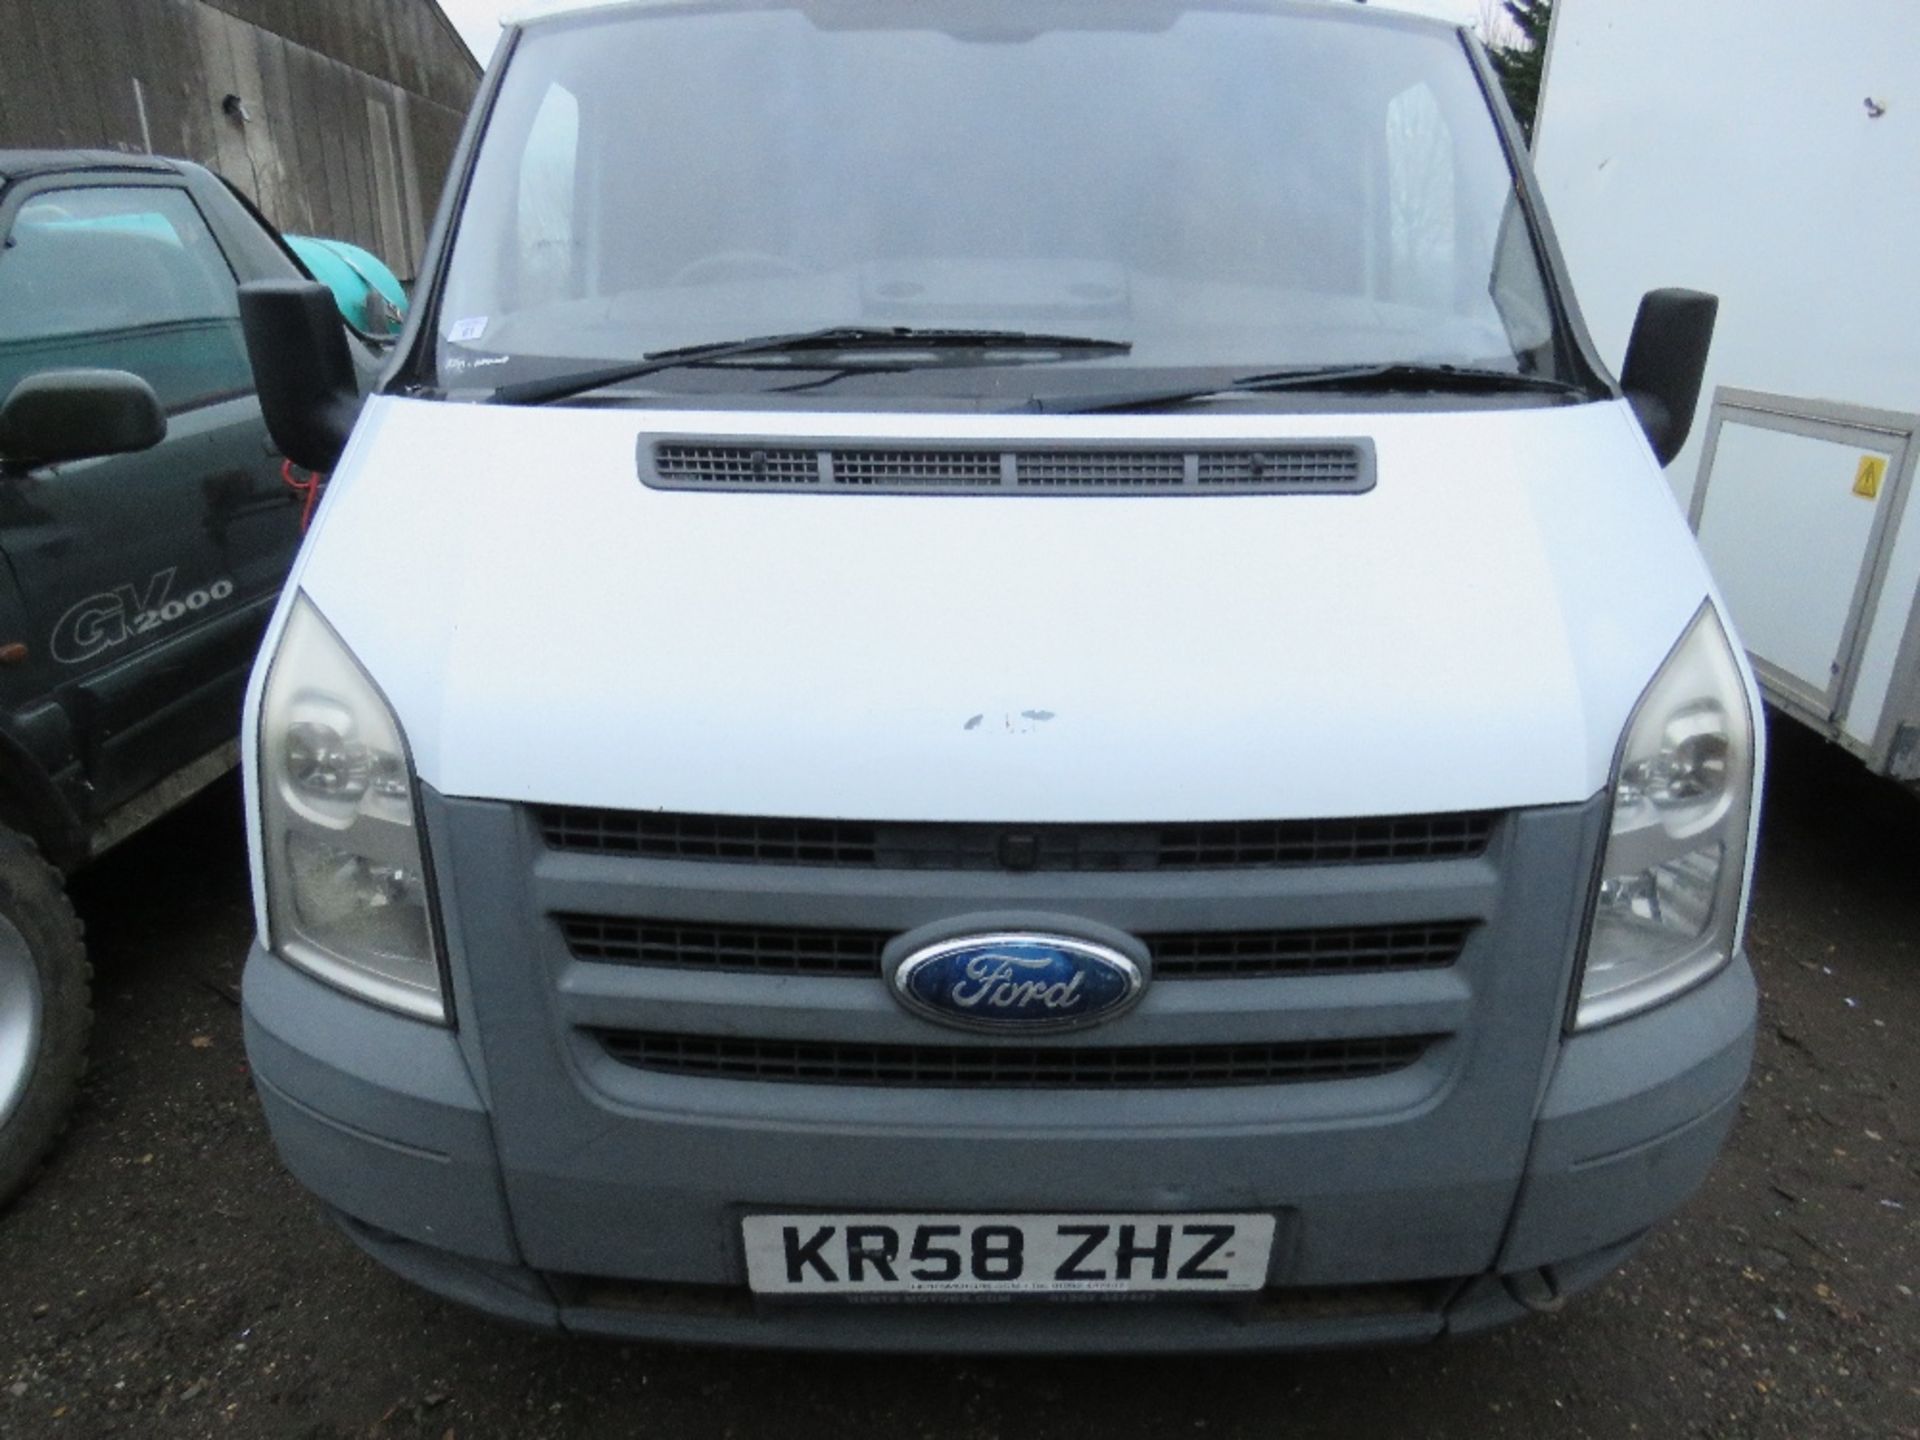 FORD TRANSIT 85 T260M FWD PANEL VAN REG:KR58 ZHZ. 150,769 REC HRS. DIRECT FROM LOCAL COMPANY SELLING - Image 2 of 15